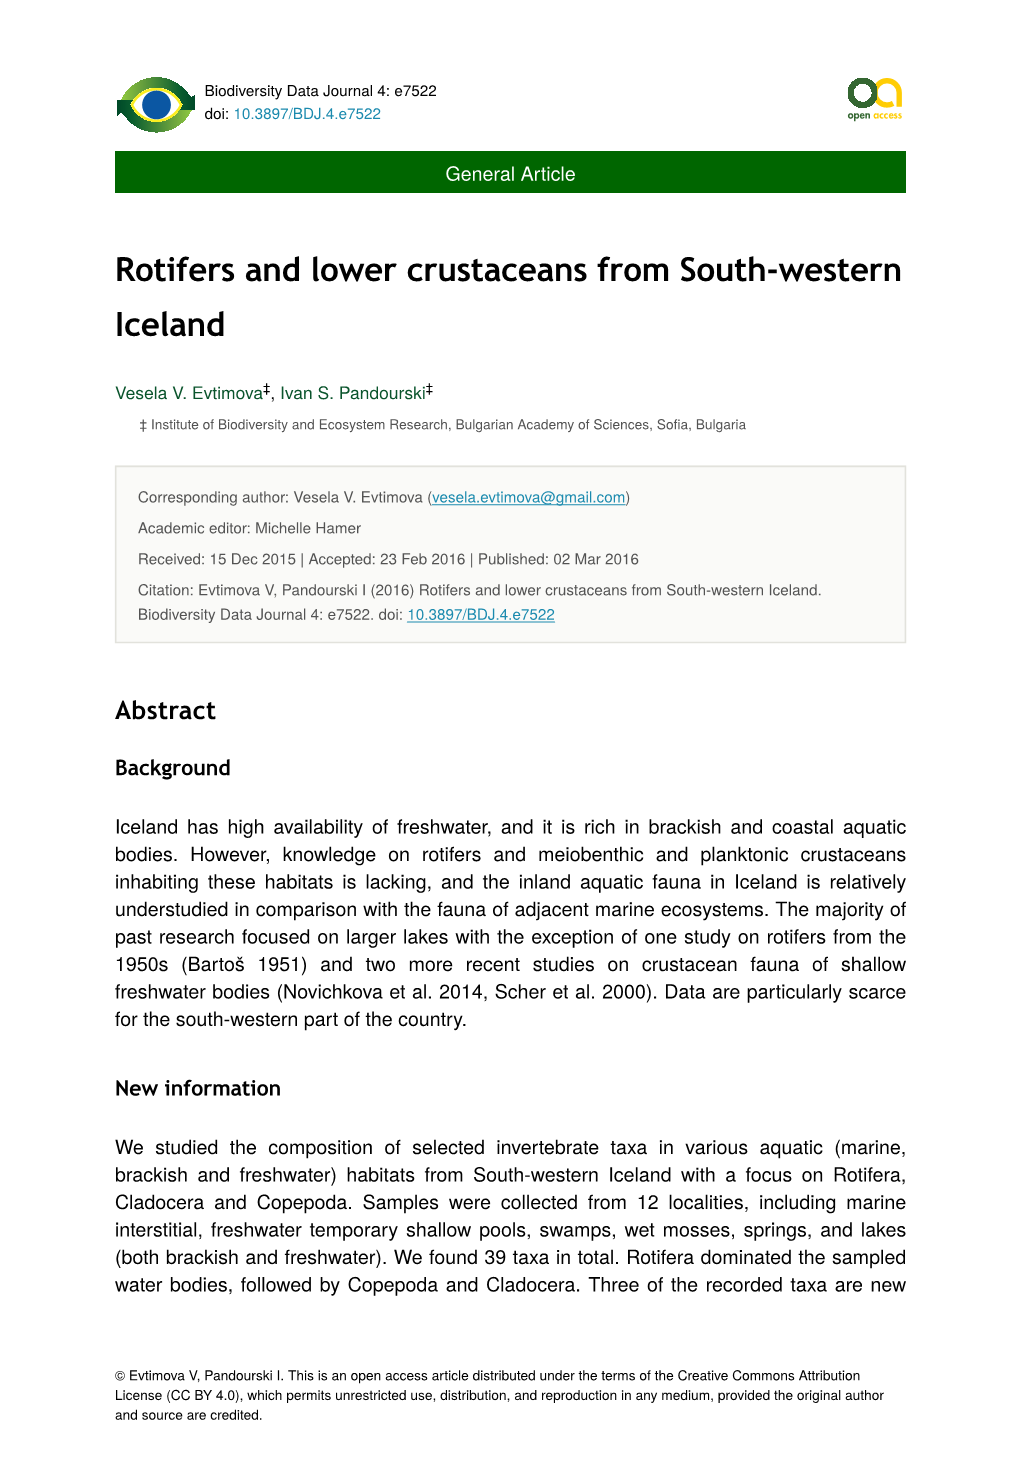 Rotifers and Lower Crustaceans from South-Western Iceland